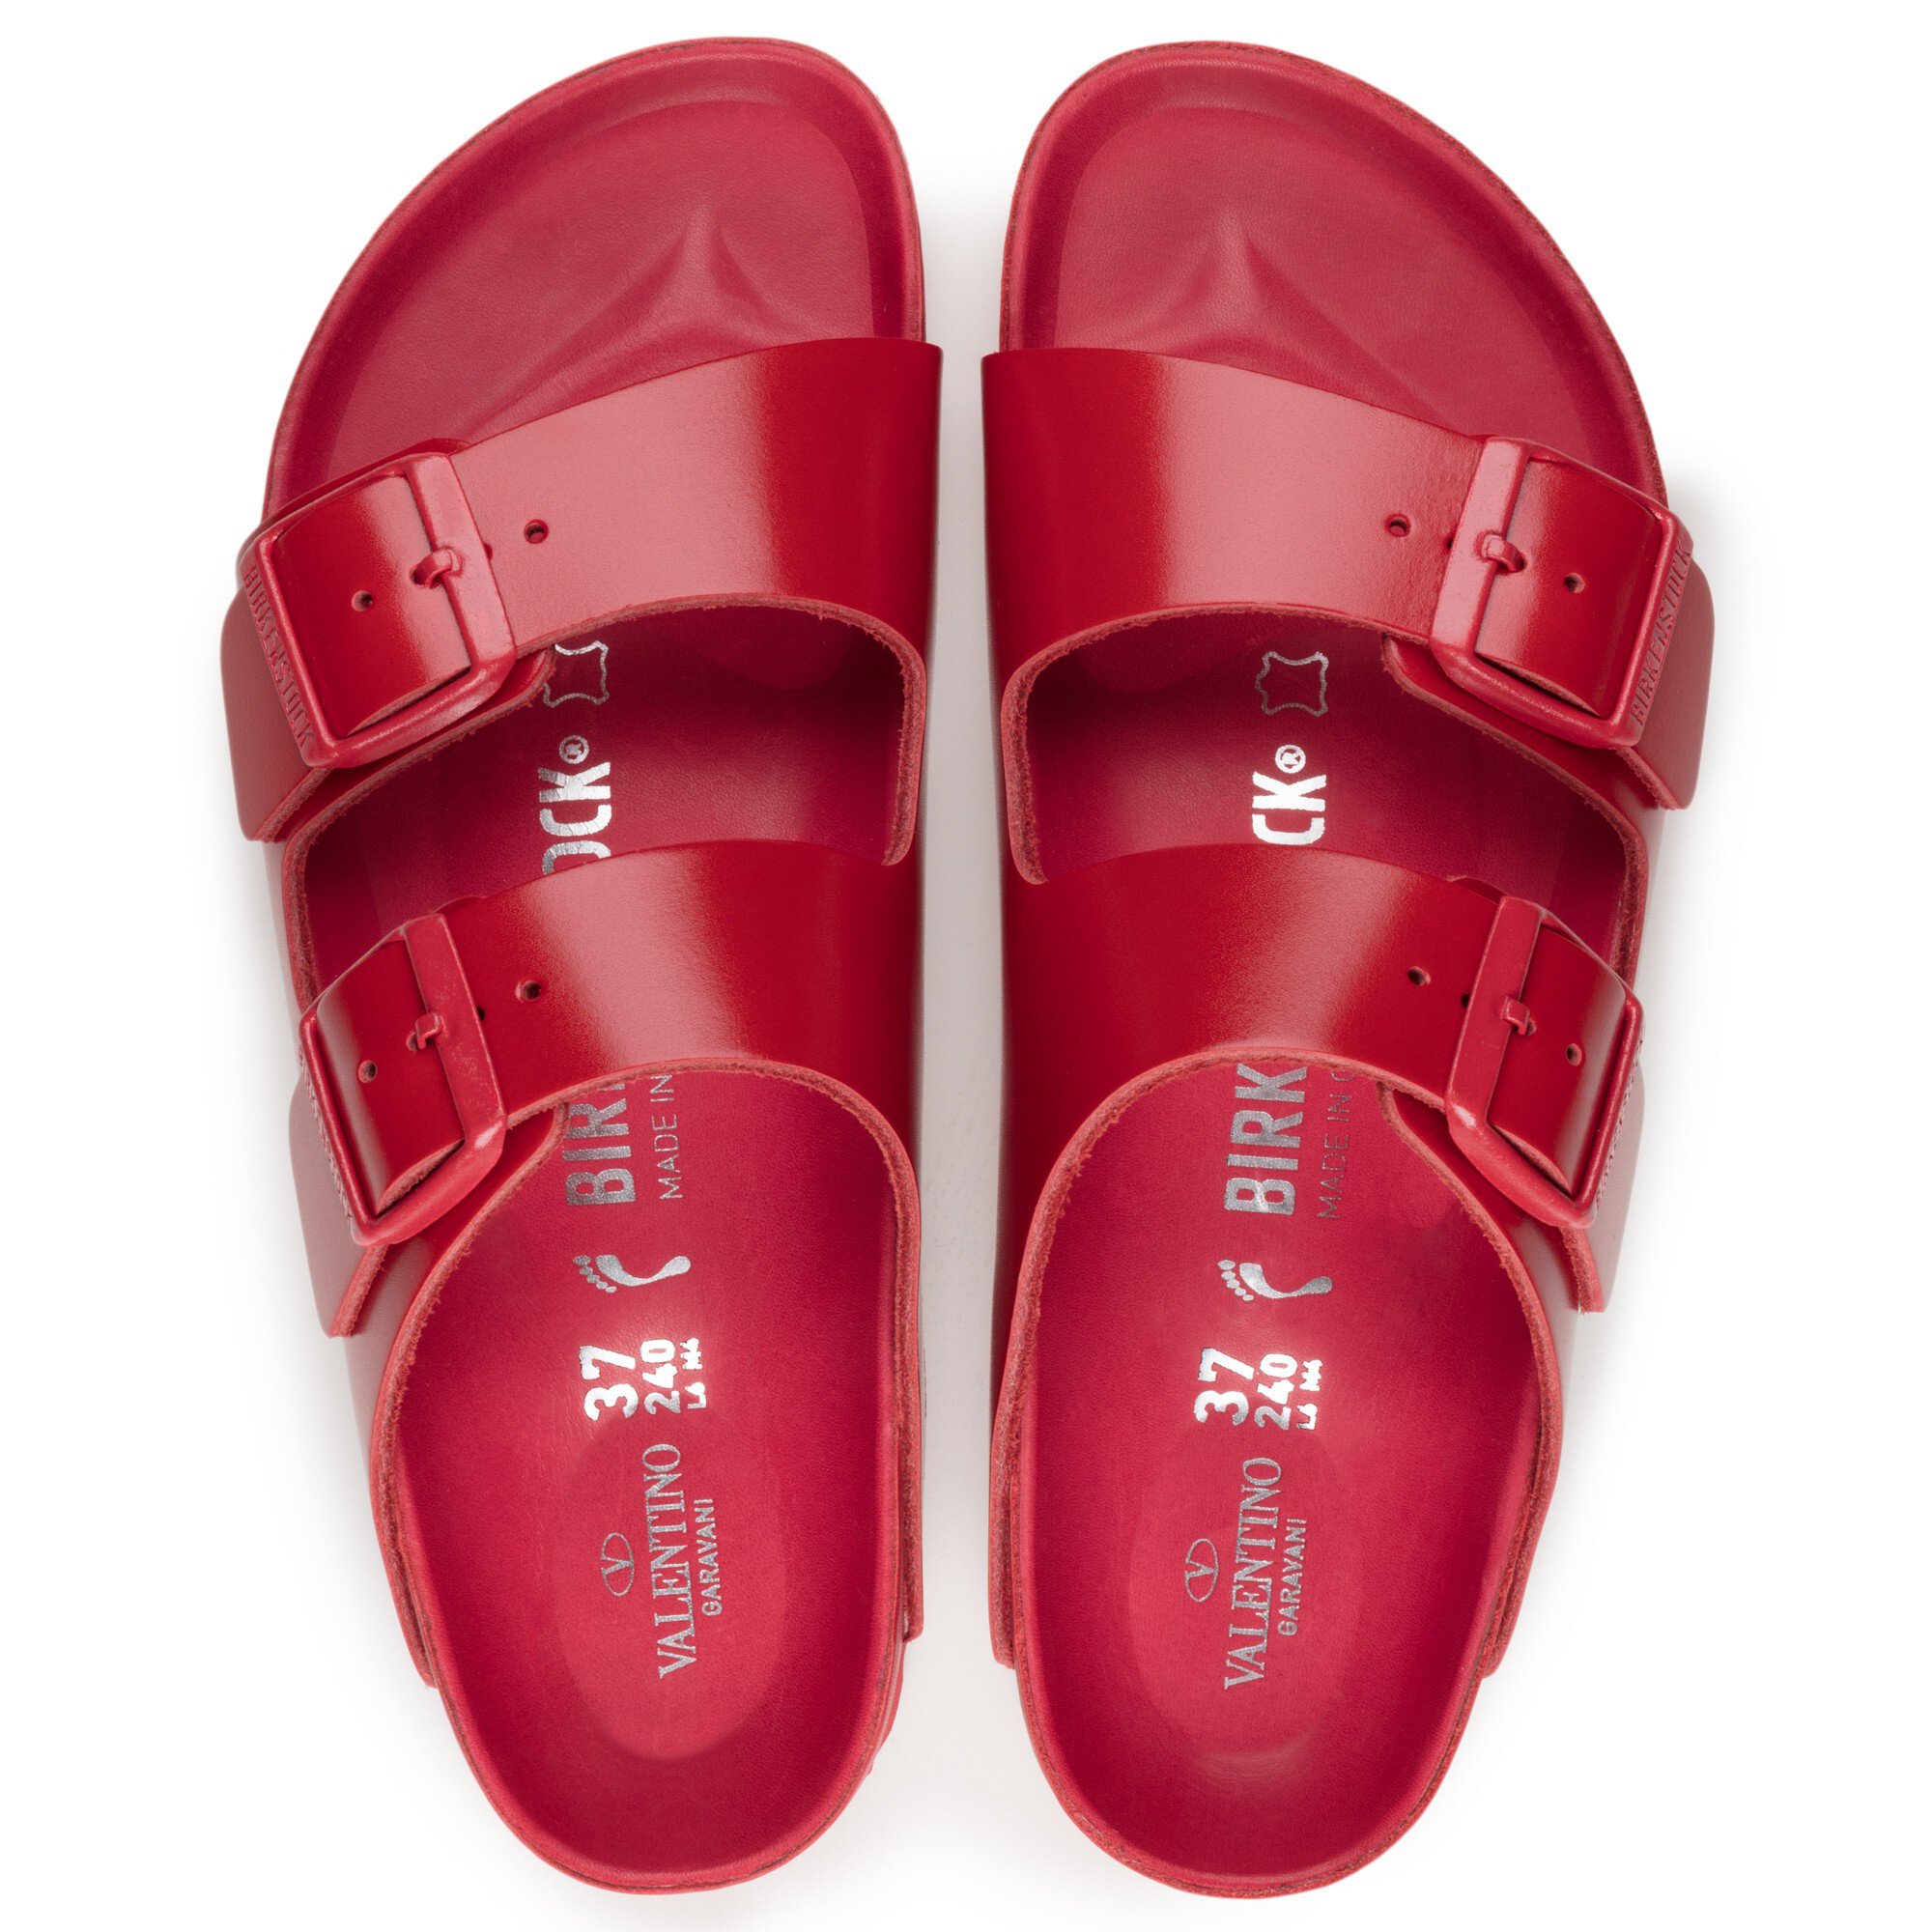 red and pink birkenstock